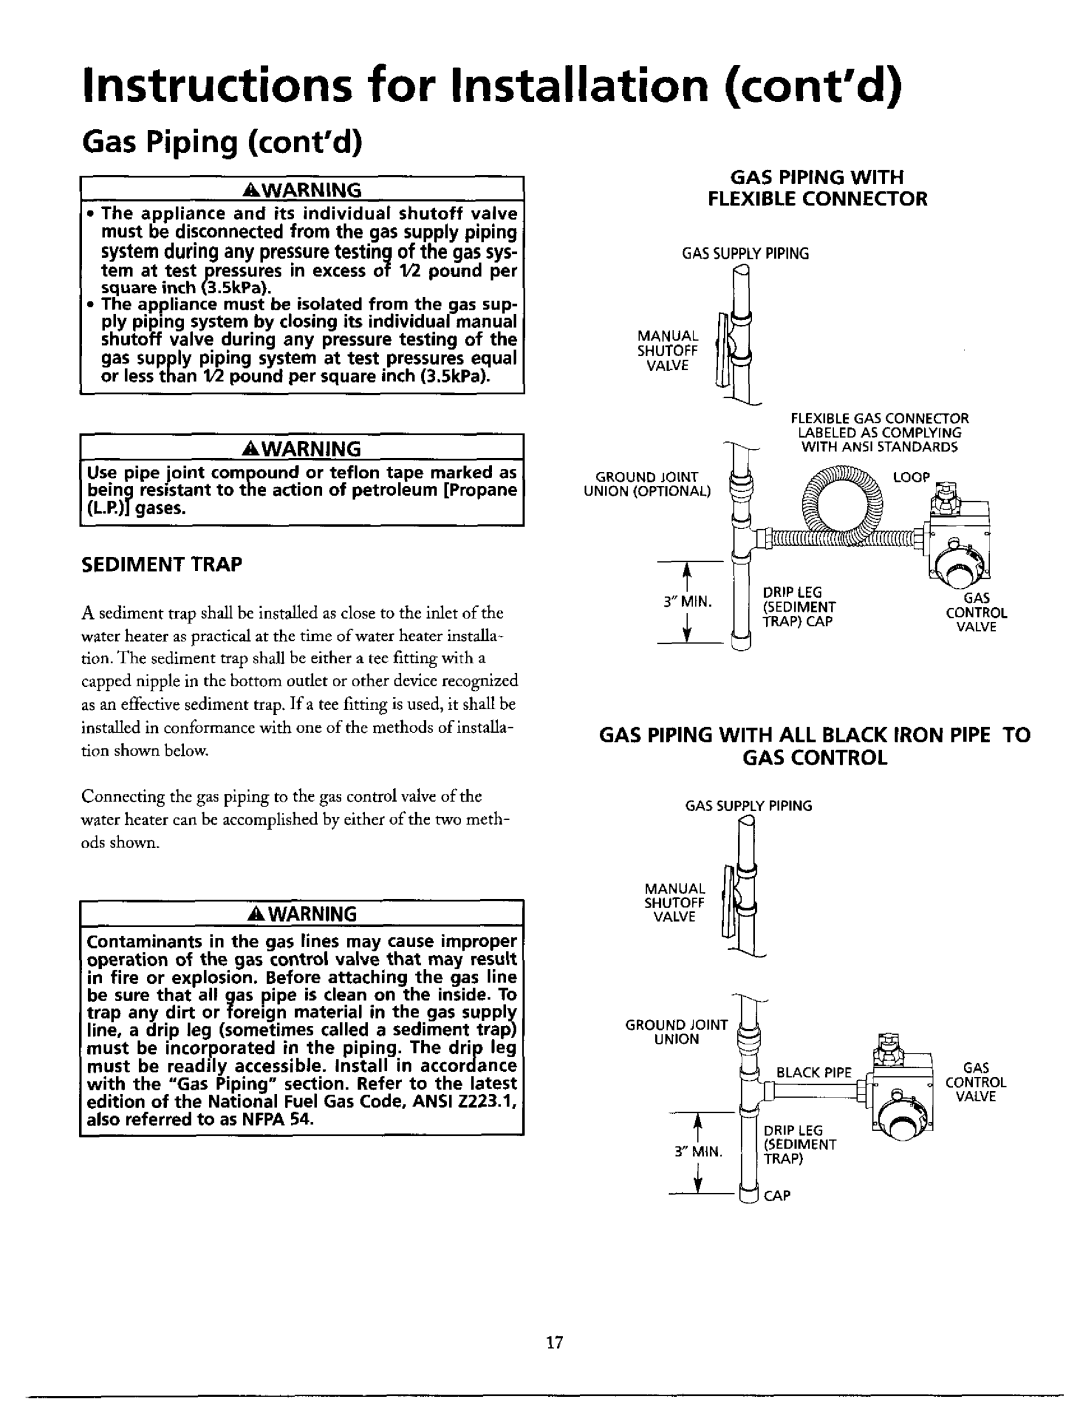 Maytag HN41240X Instructions for Installation contd, Gas Piping, A sediment trap shall be installed, as close, Sediment 